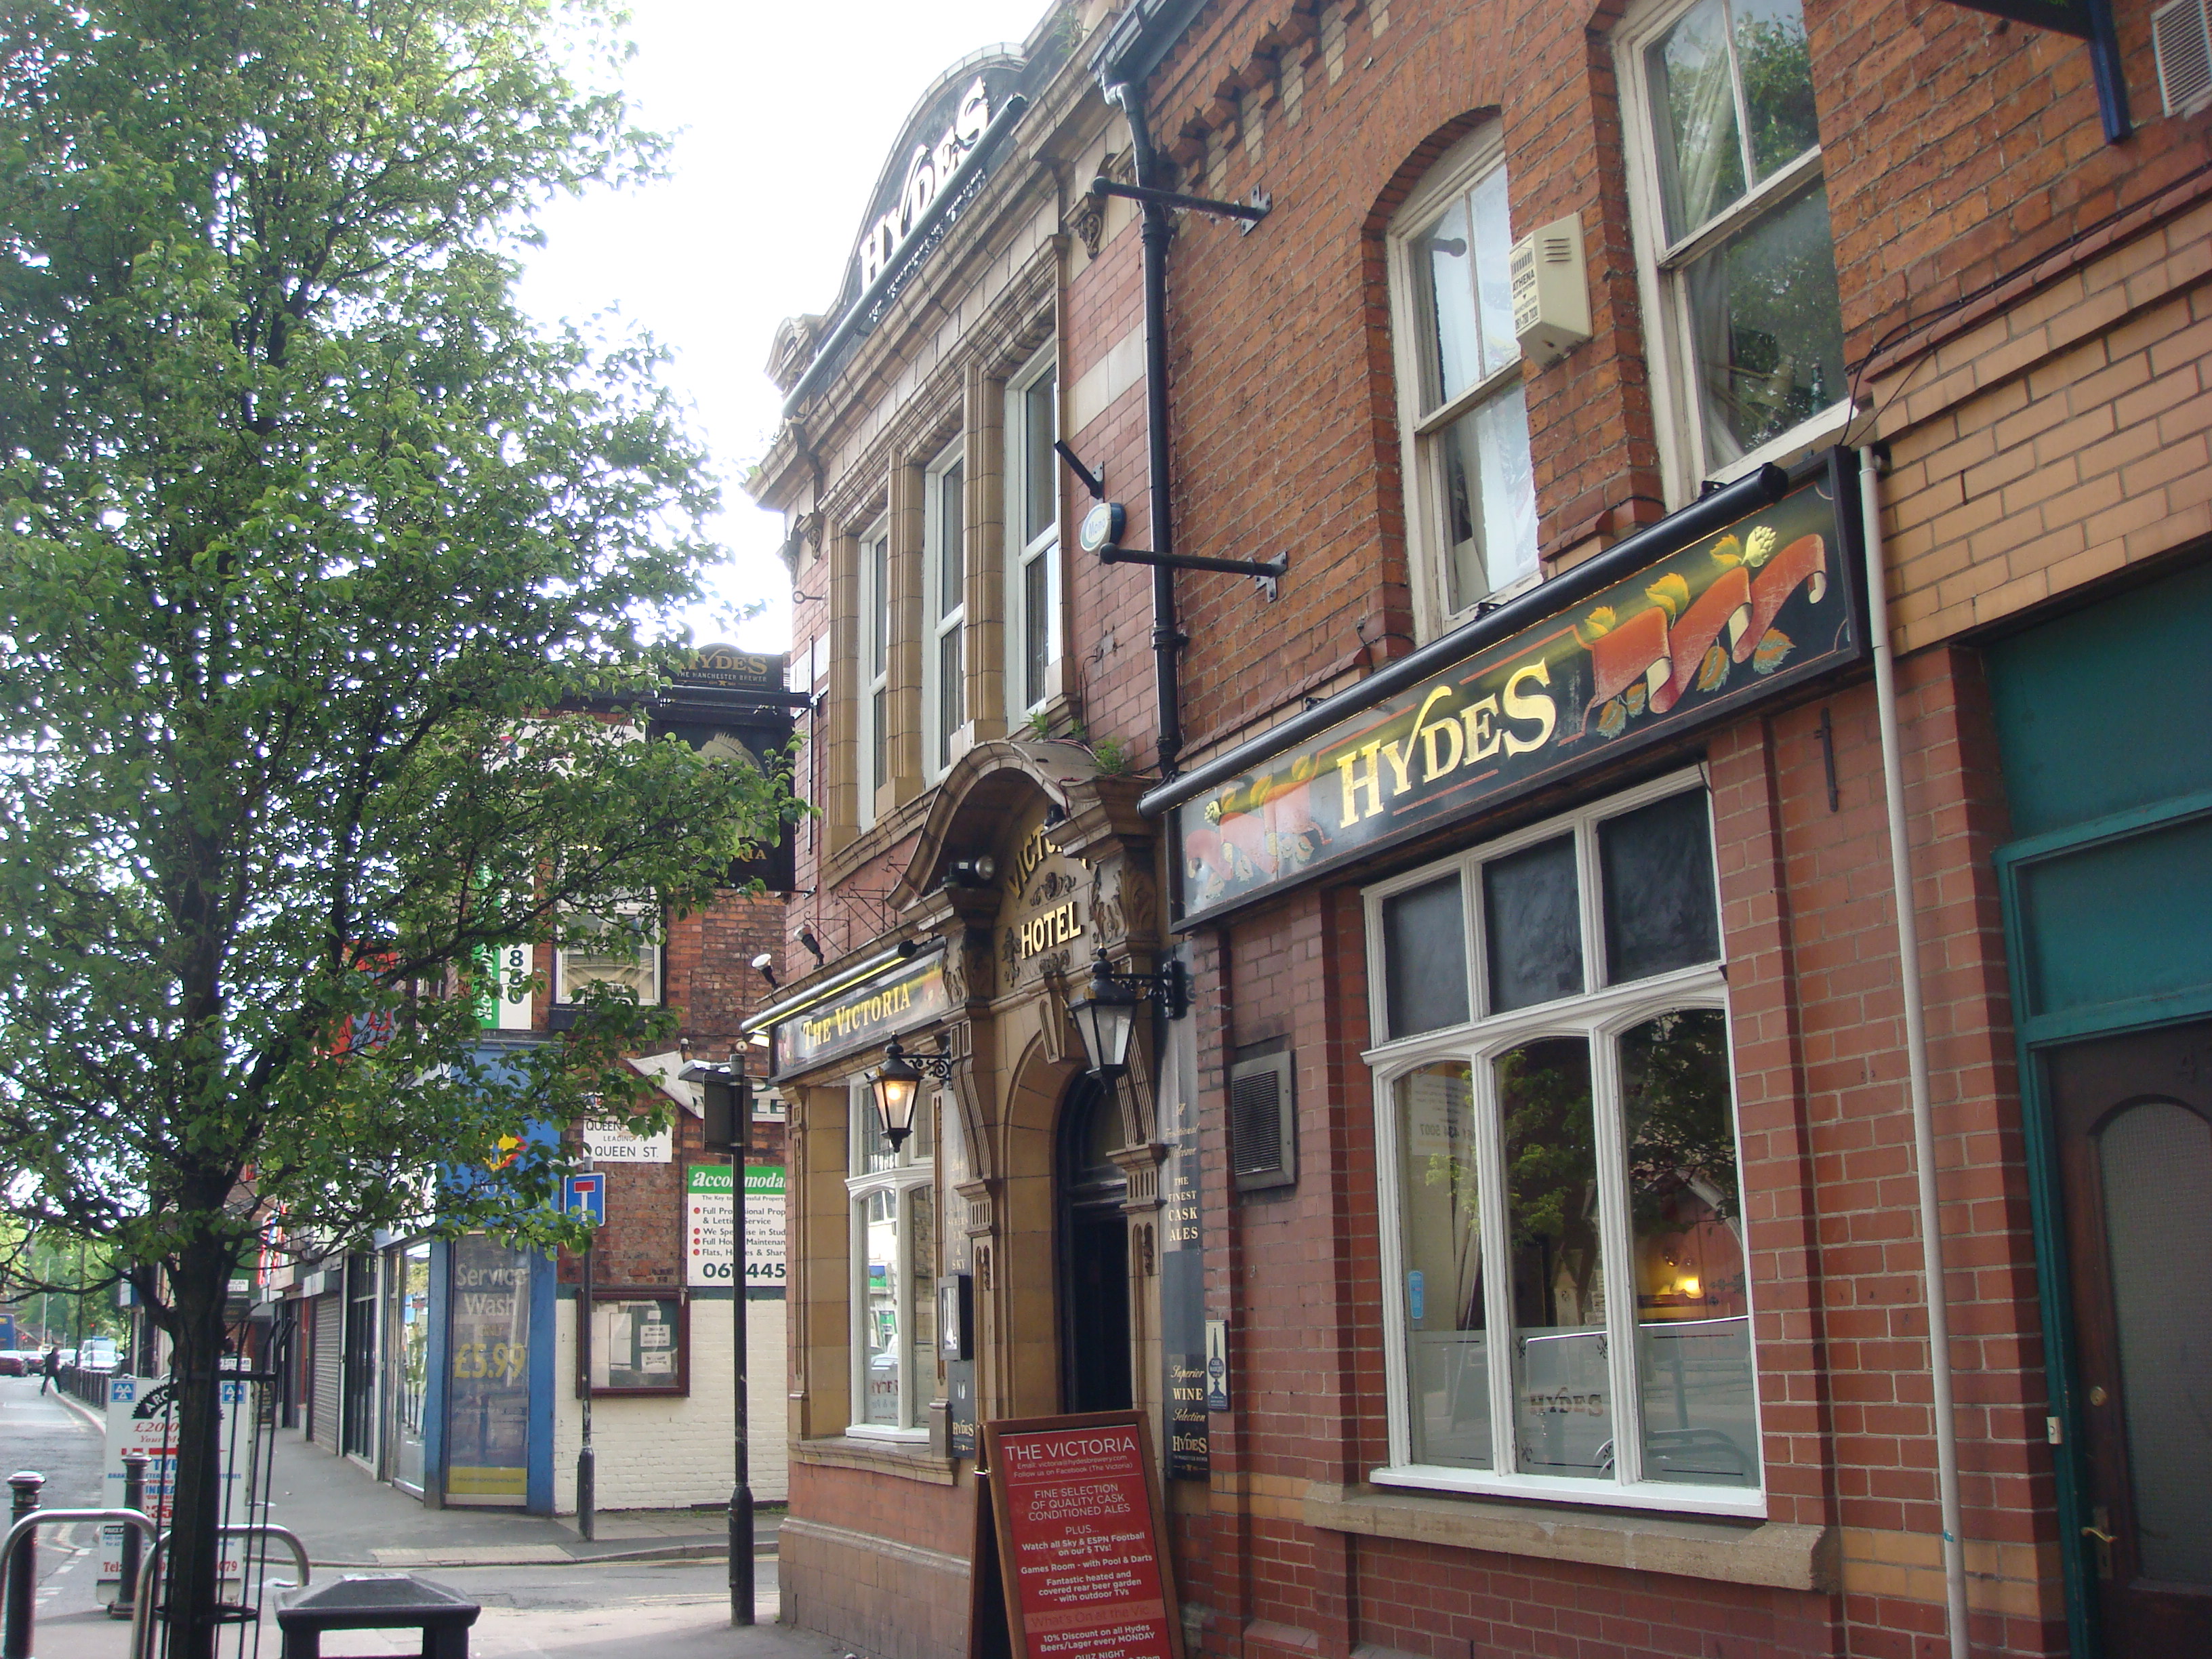 The Victoria public house, Withington